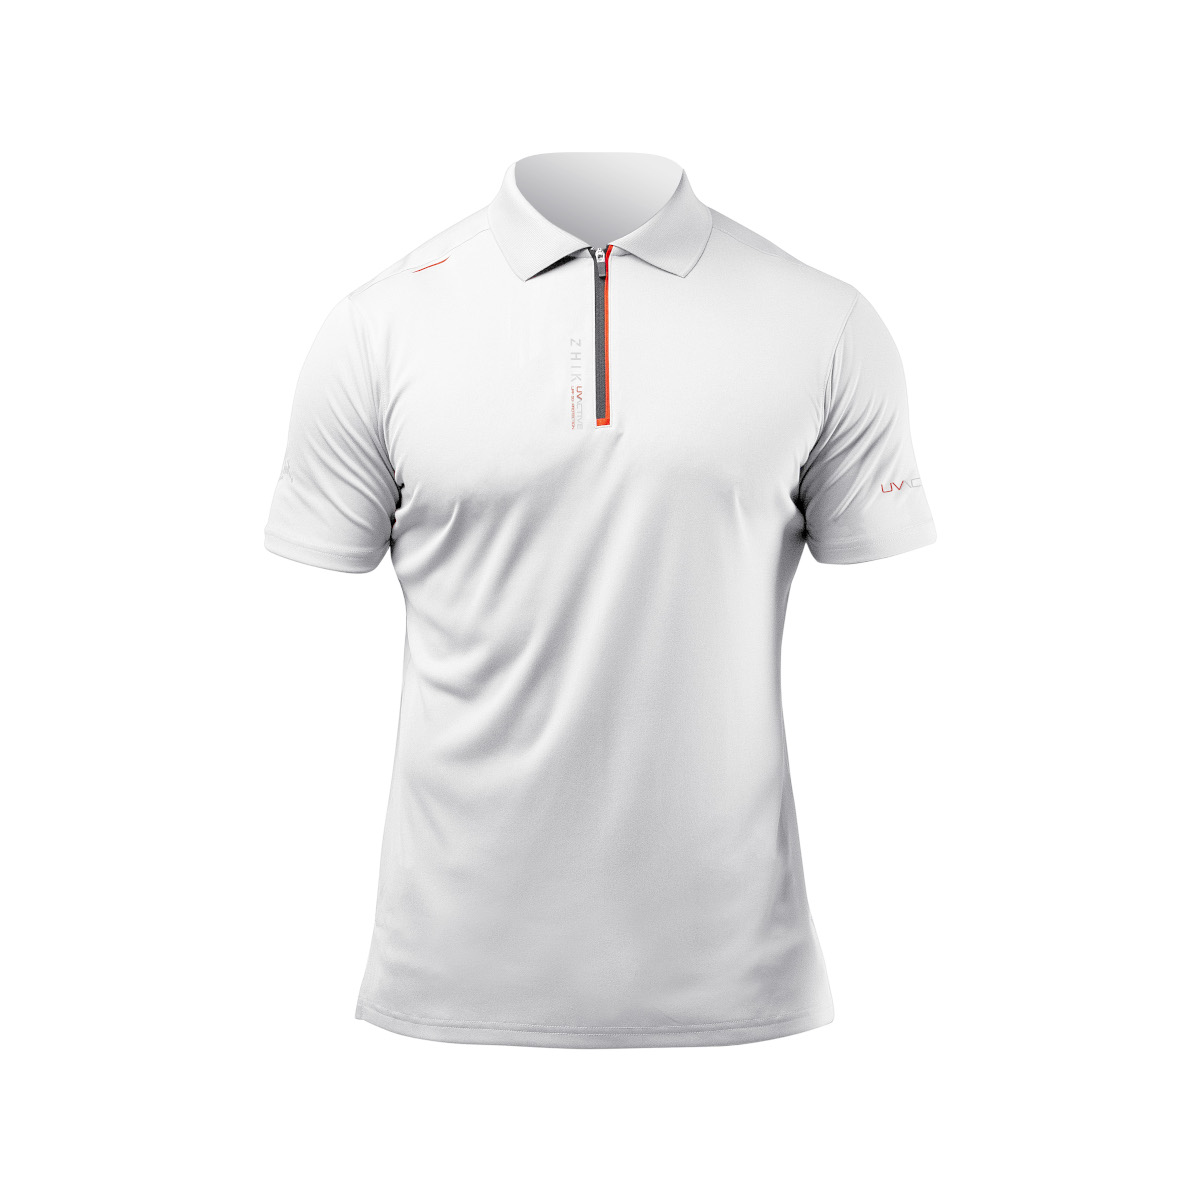 Zhik UVActive Zip polo homme blanc, taille S